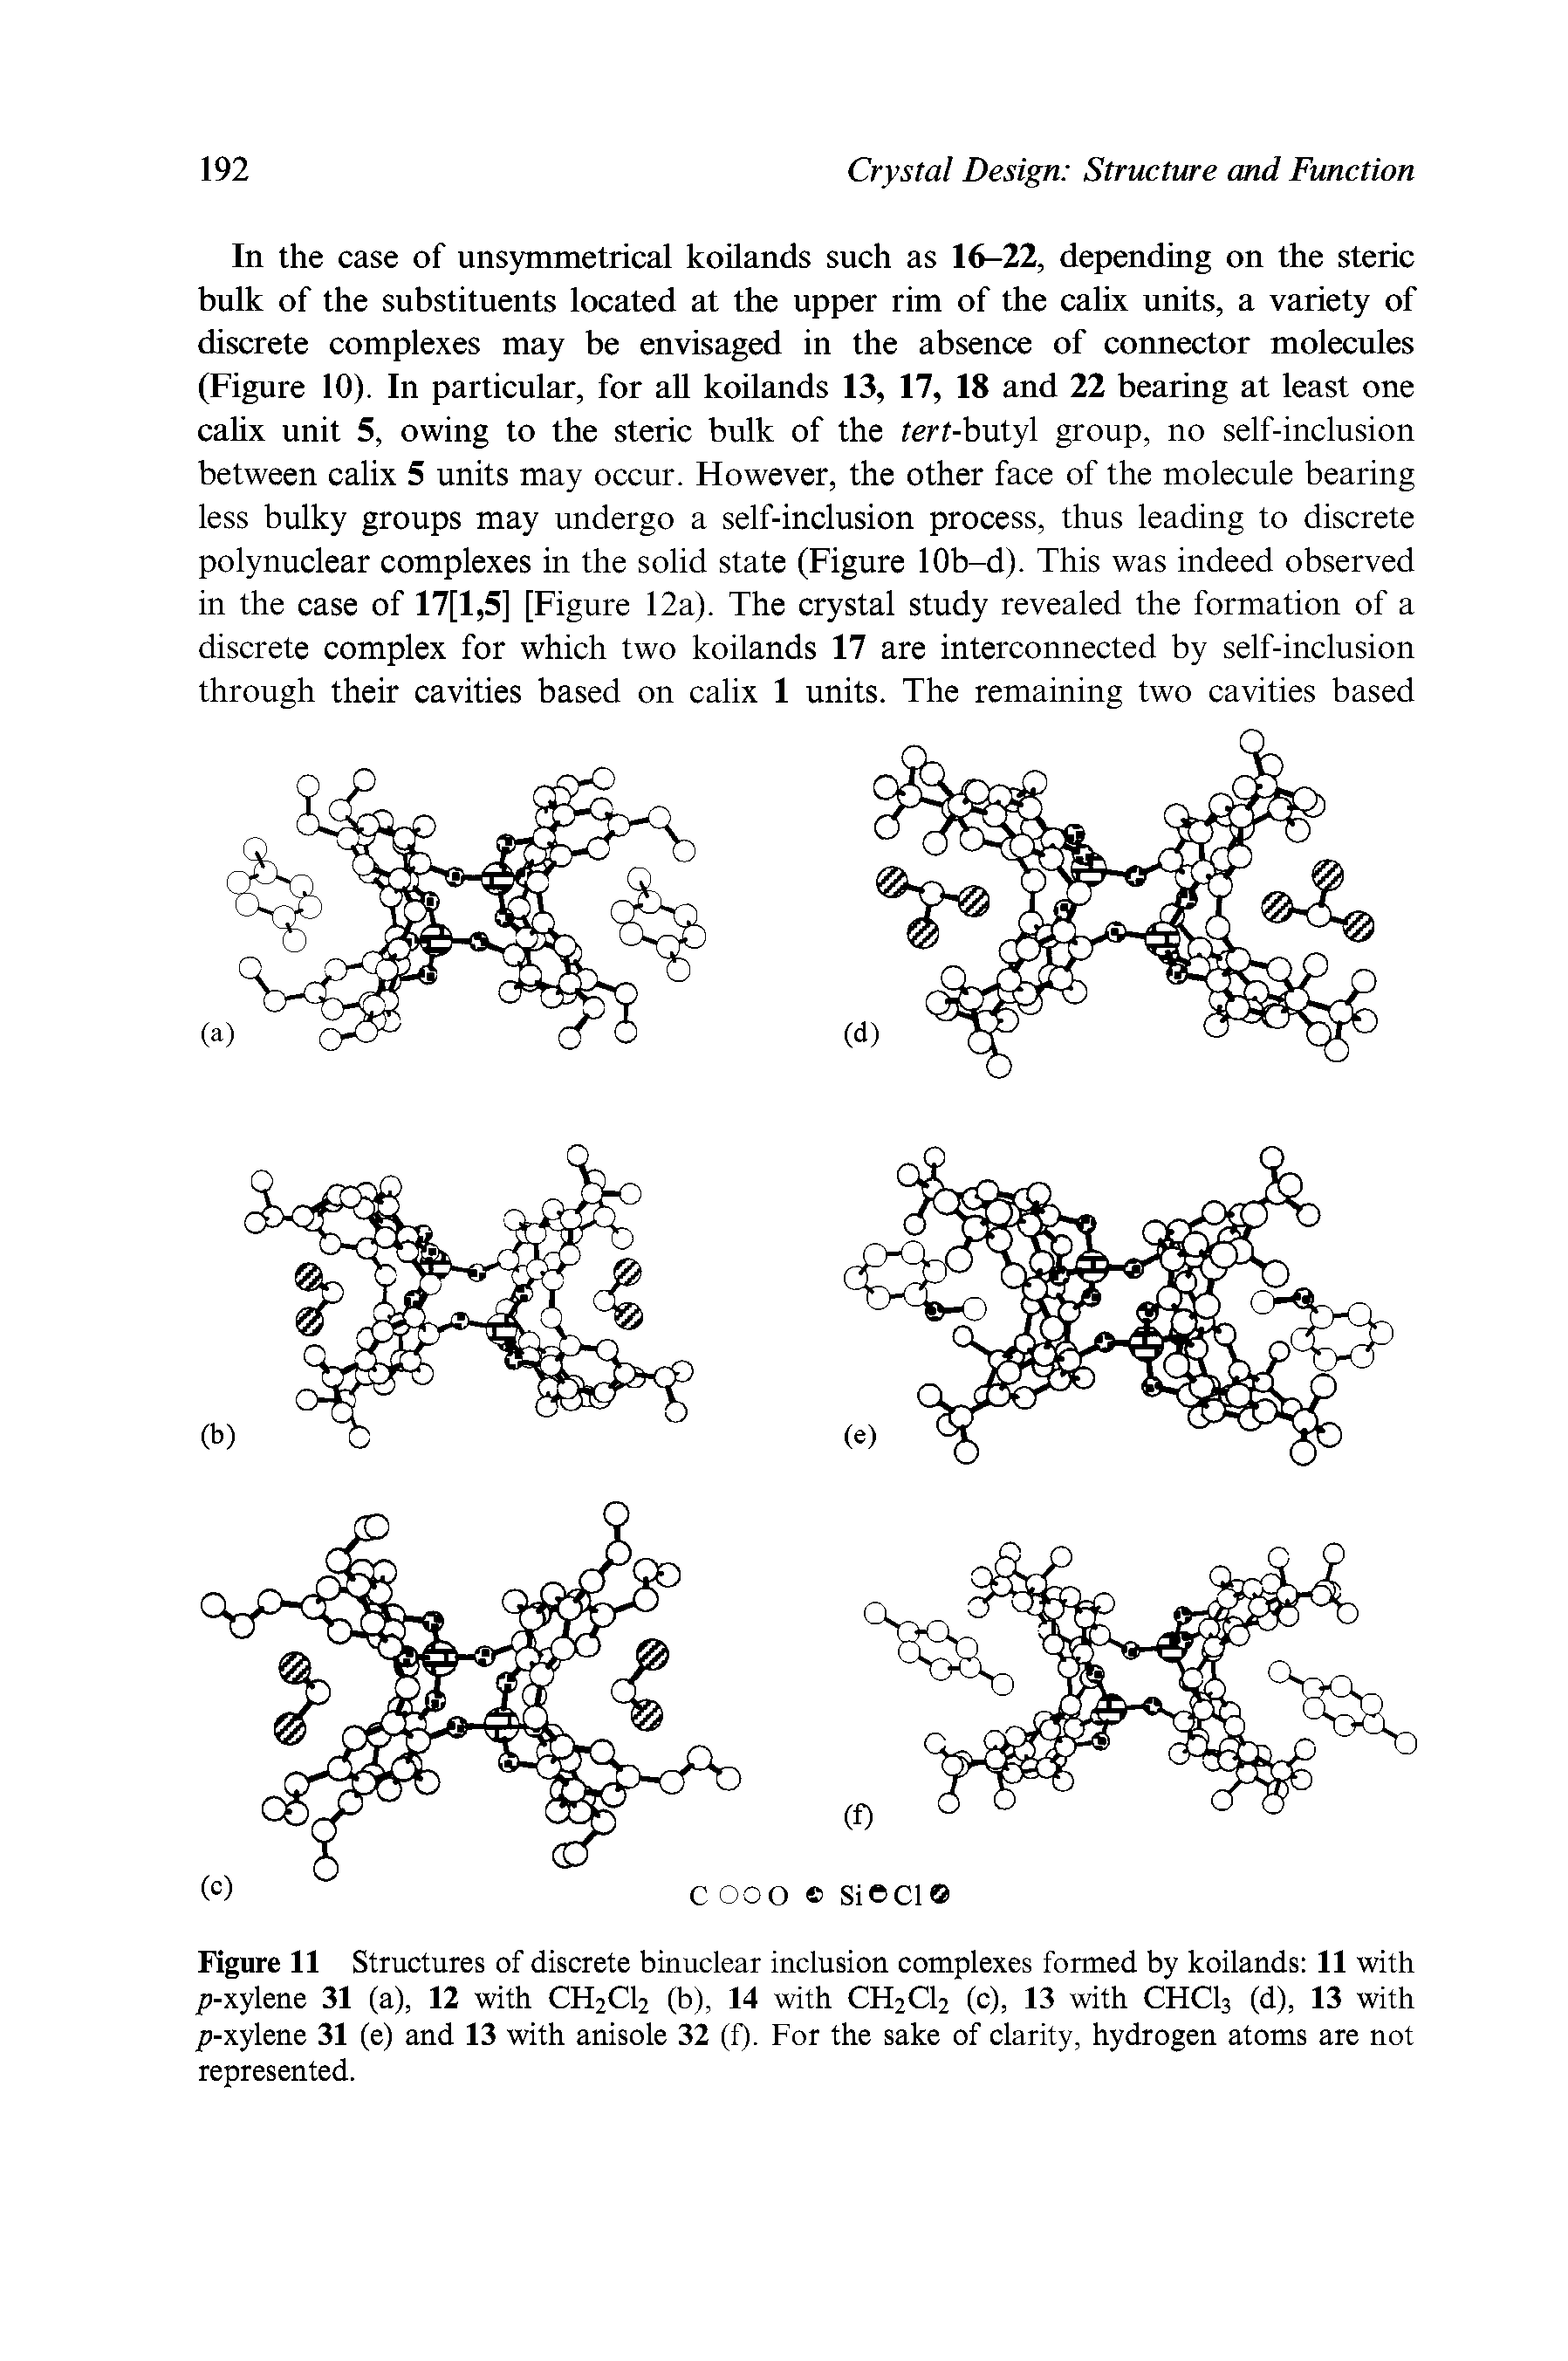 Figure 11 Structures of discrete binuclear inclusion complexes formed by koilands 11 with />-xylene 31 (a), 12 with CH2C12 (b), 14 with CH2C12 (c), 13 with CHC13 (d), 13 with />-xylene 31 (e) and 13 with anisole 32 (f). For the sake of clarity, hydrogen atoms are not represented.